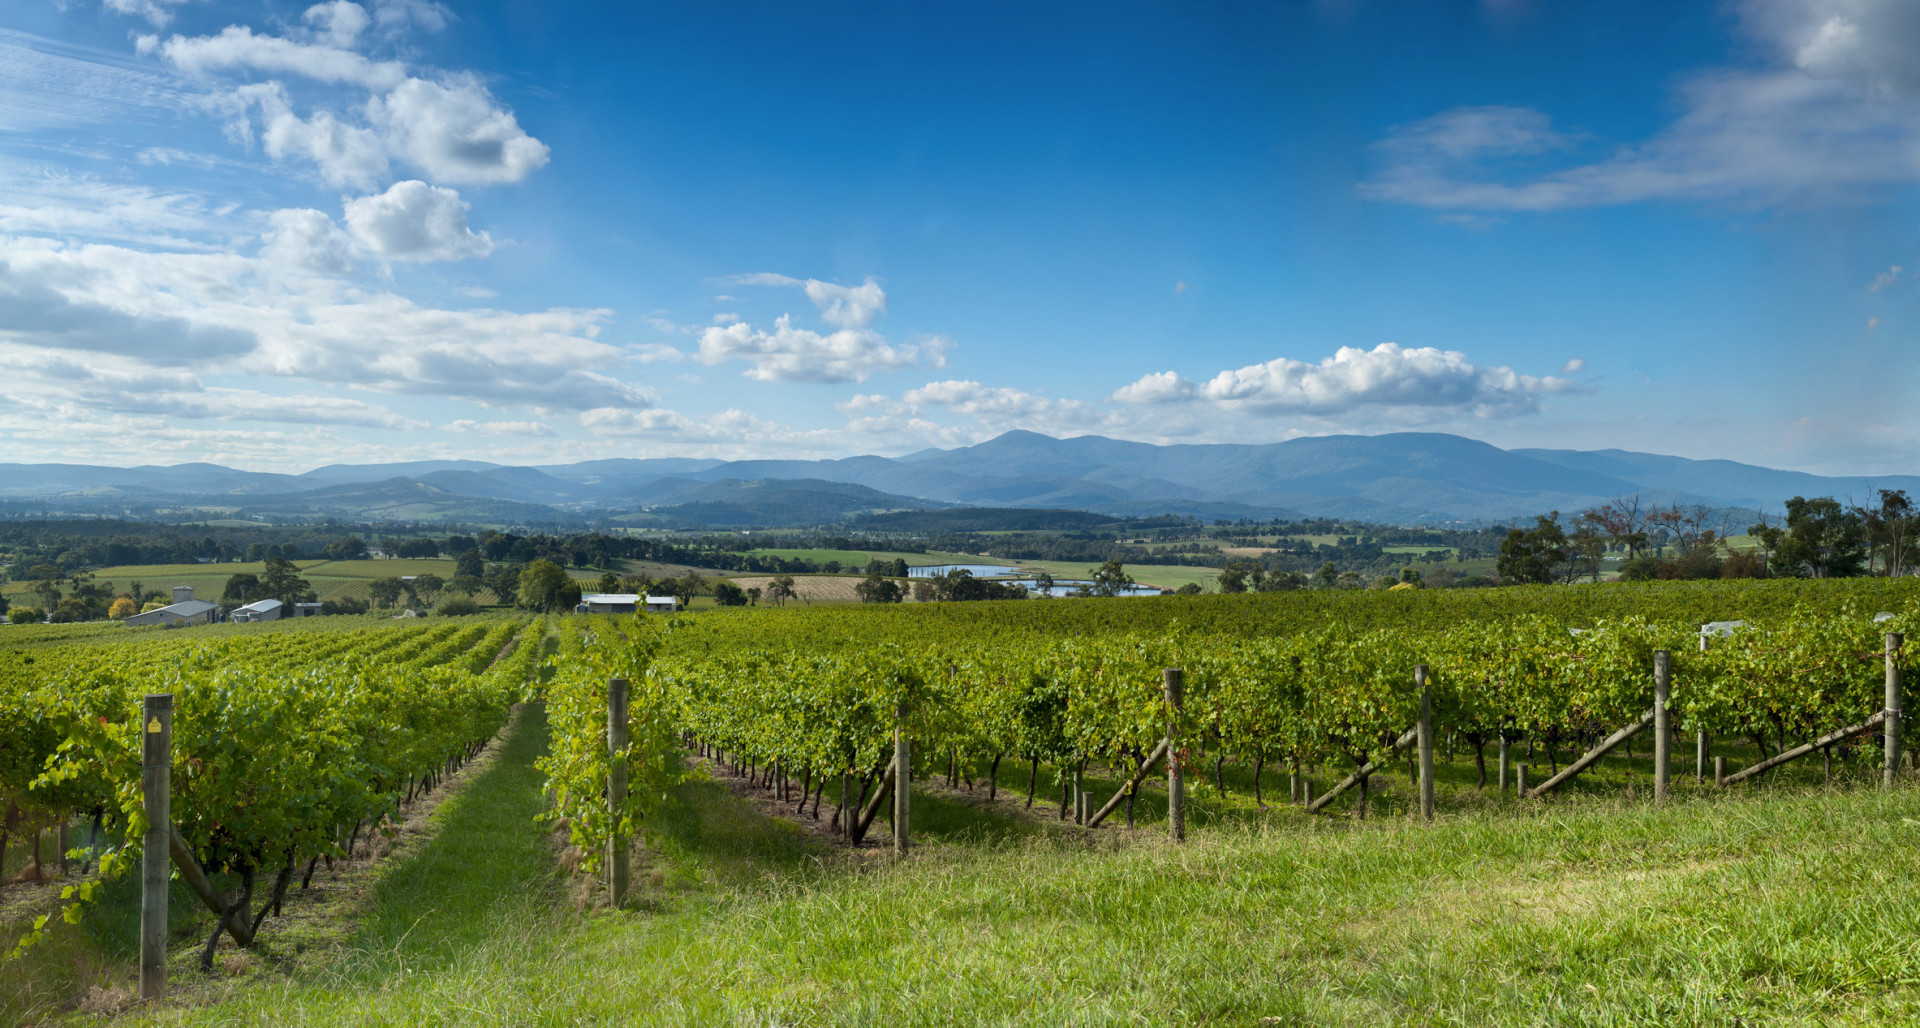 Famous for its Chardonnay and Pinot Noir, Victoria's Yarra Valley embraces a number of top-notch wineries that offer vineyard and cellar tours, and tastings galore!<p><a href="https://www.msn.com/en-us/community/channel/vid-7xx8mnucu55yw63we9va2gwr7uihbxwc68fxqp25x6tg4ftibpra?cvid=94631541bc0f4f89bfd59158d696ad7e">Follow us and access great exclusive content every day</a></p>